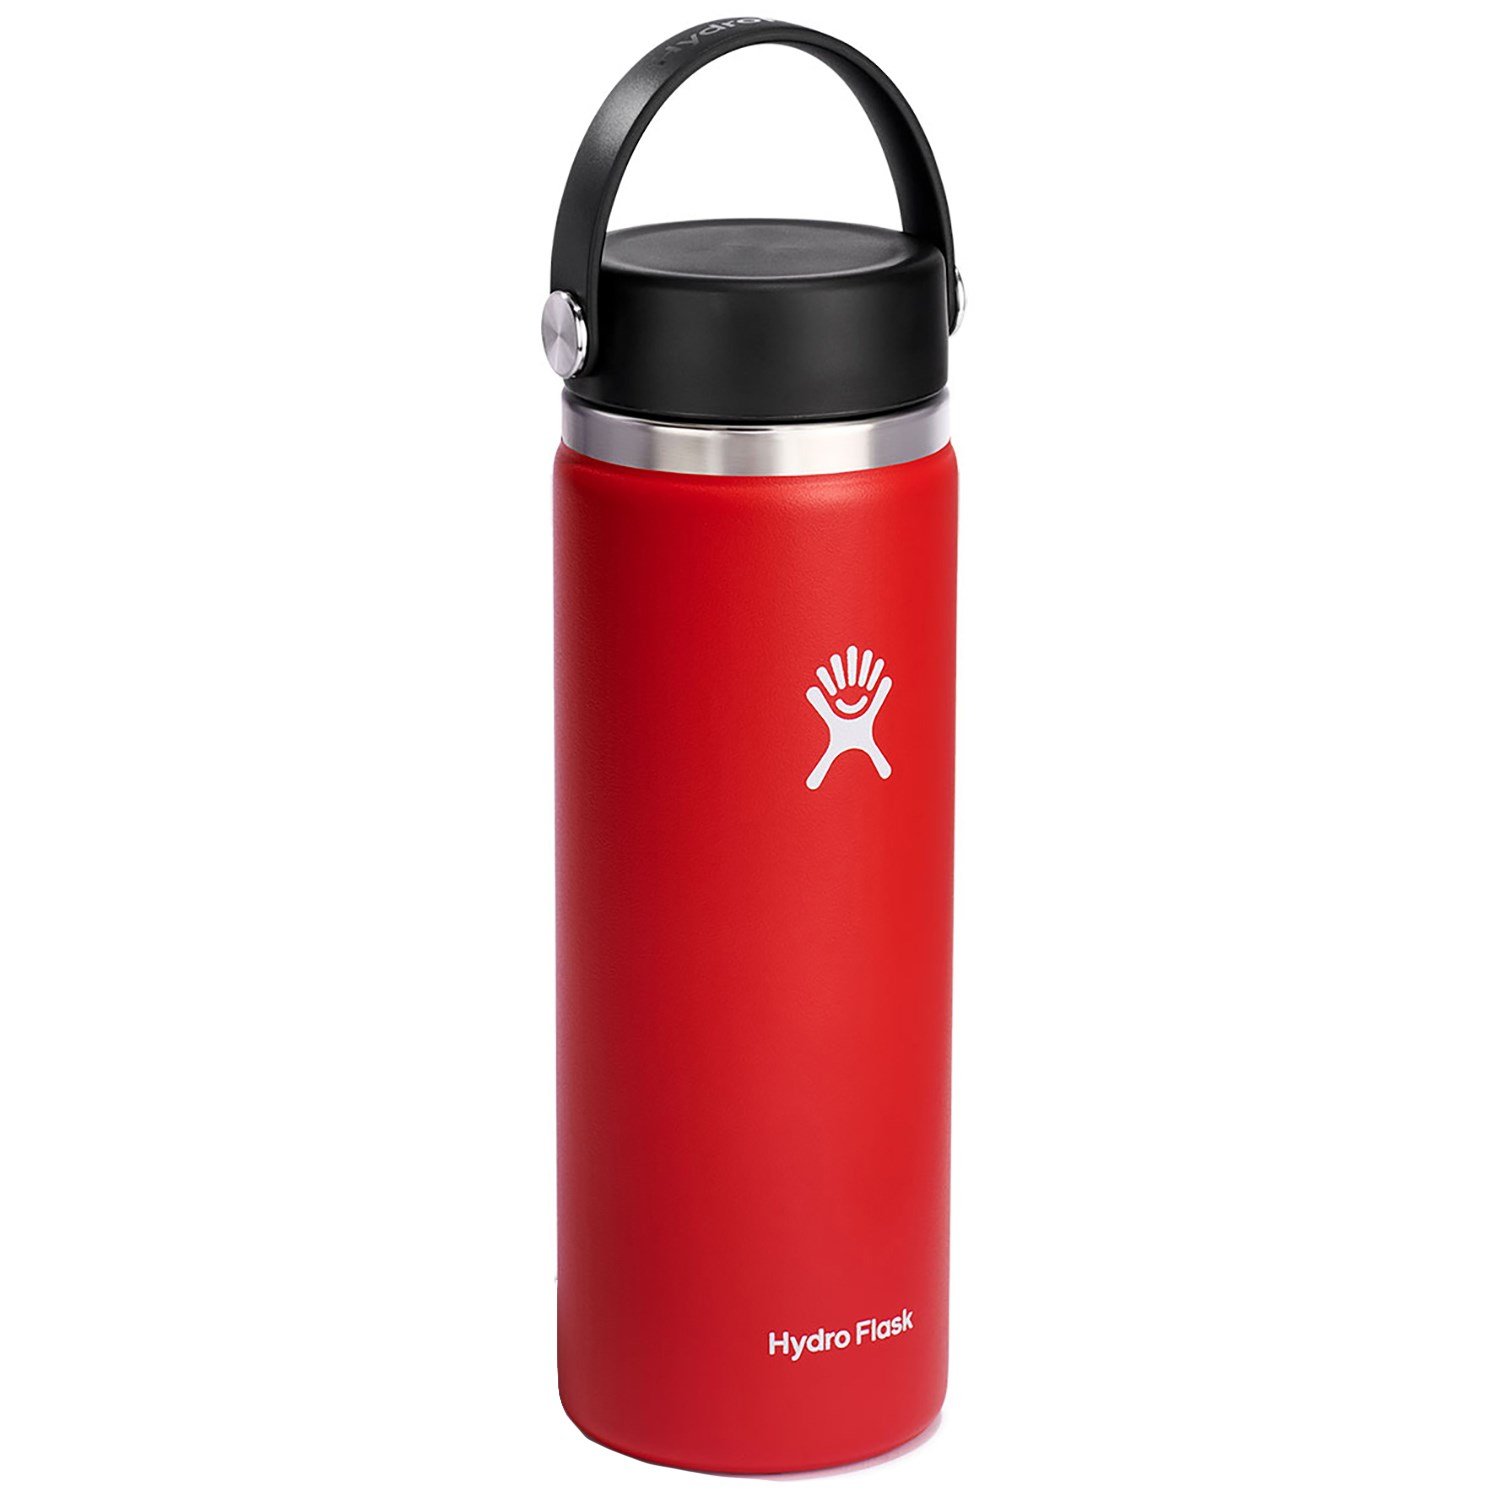 https://images.evo.com/imgp/zoom/167433/941184/hydro-flask-20oz-wide-mouth-water-bottle-.jpg